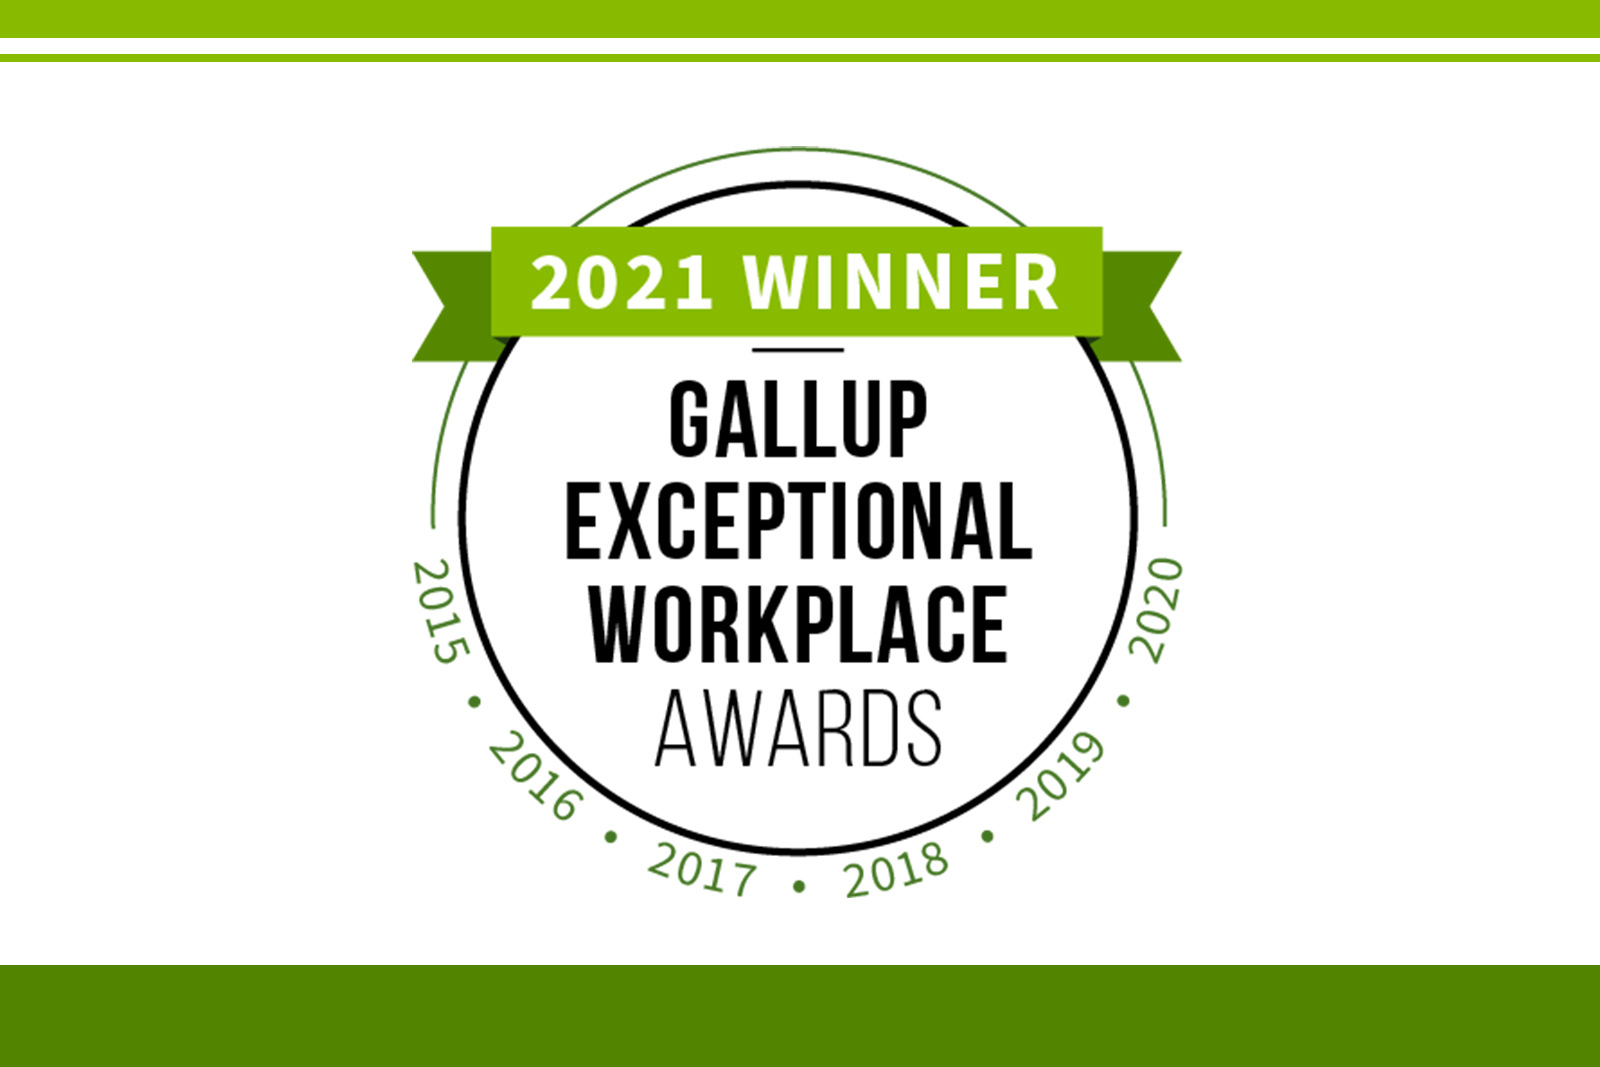 Gallup Exceptional Workplace Award logo